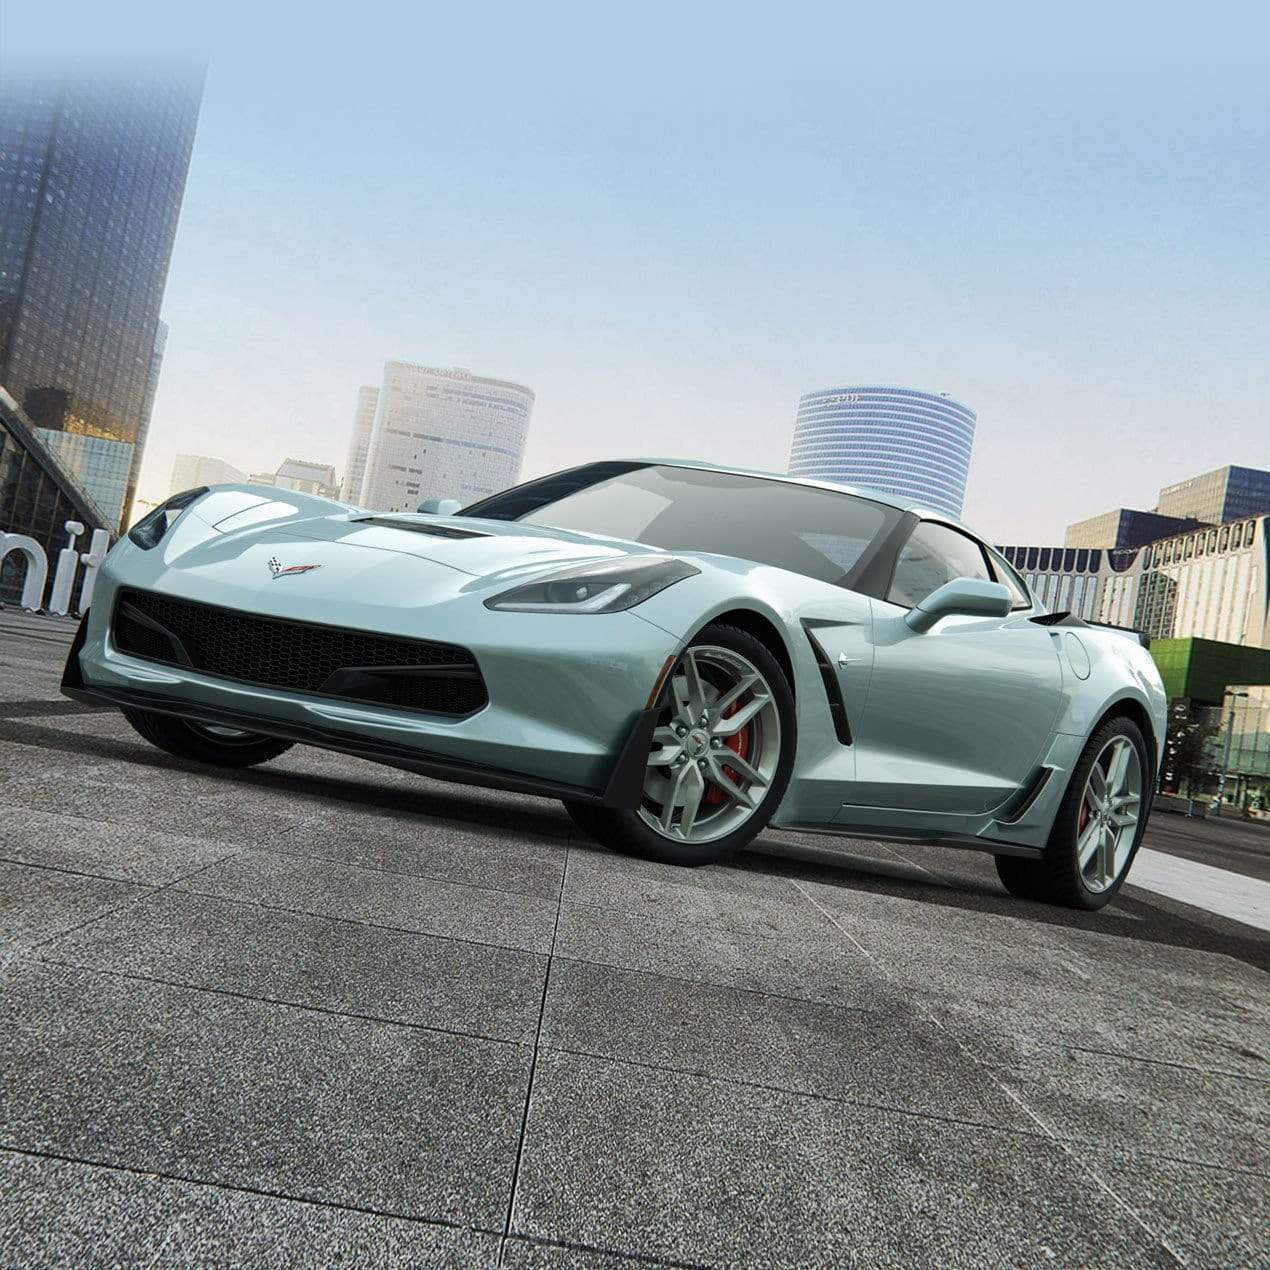 ACS Composite C7 Corvette Stingray Coupe Rear Widebody Conversion Kit with Z06 Scoop, SKU 45-4-073.